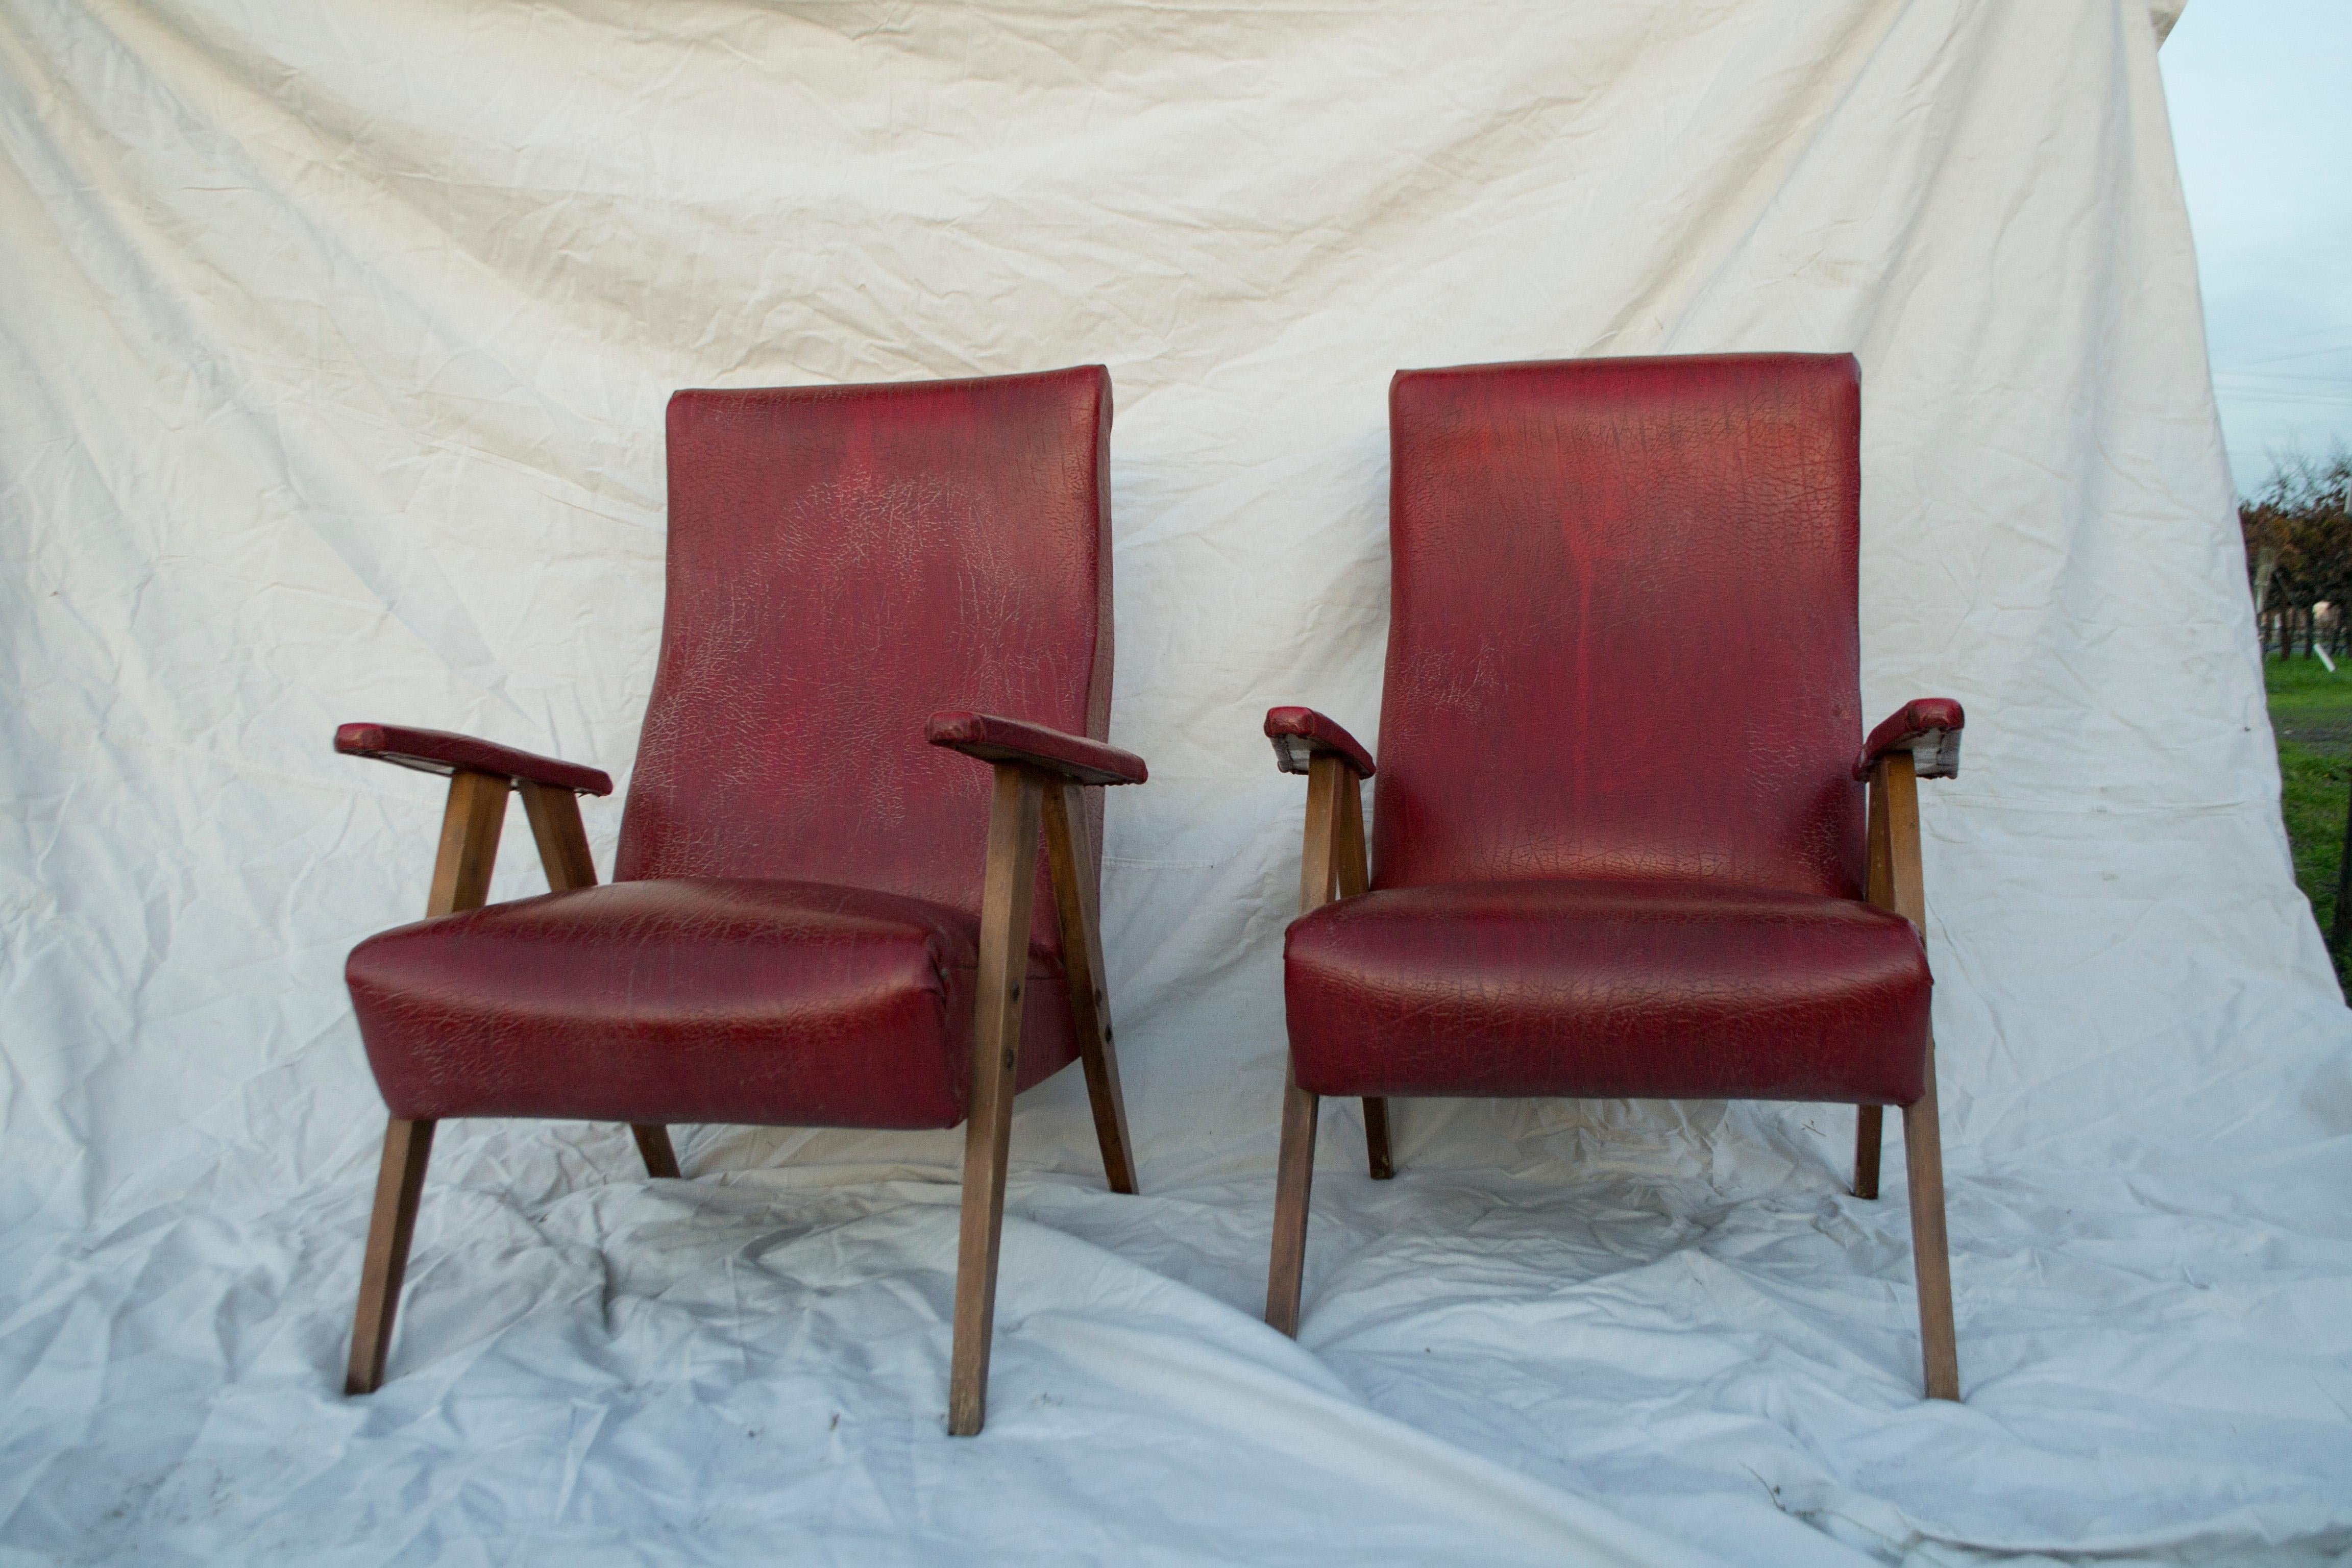 Vintage Red Leather Armchairs, circa 20th Century In Good Condition For Sale In Napa, CA